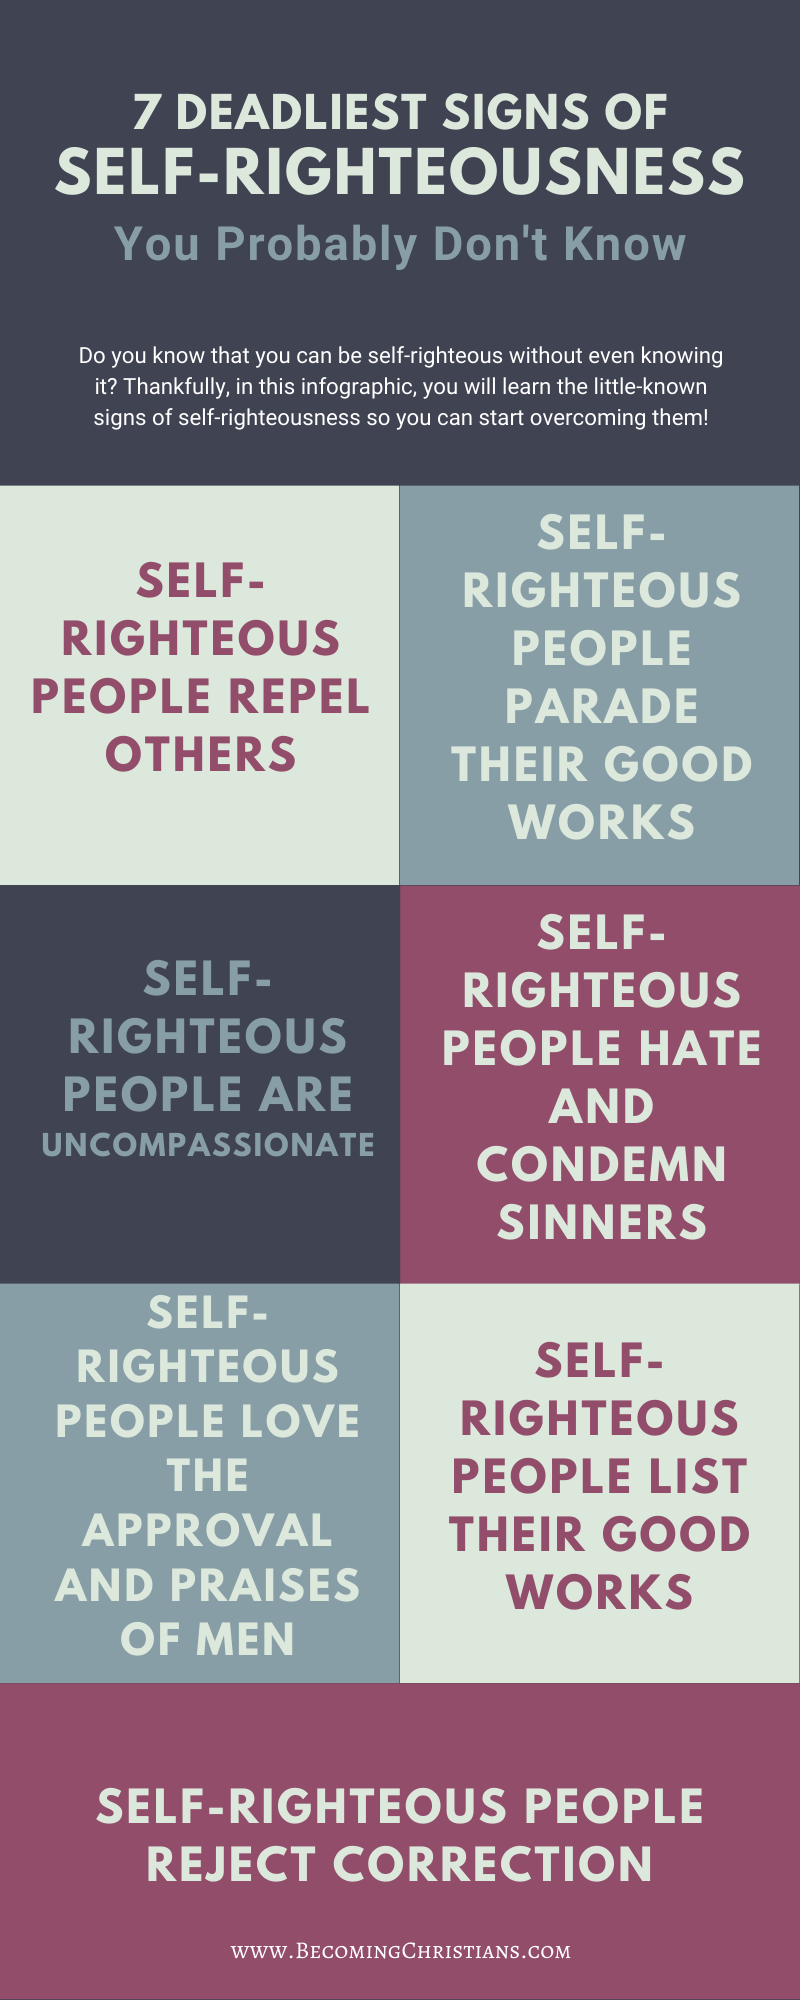 10 DEADLIEST Signs of Self-Righteousness You Probably Don't Know | Becoming  Christians